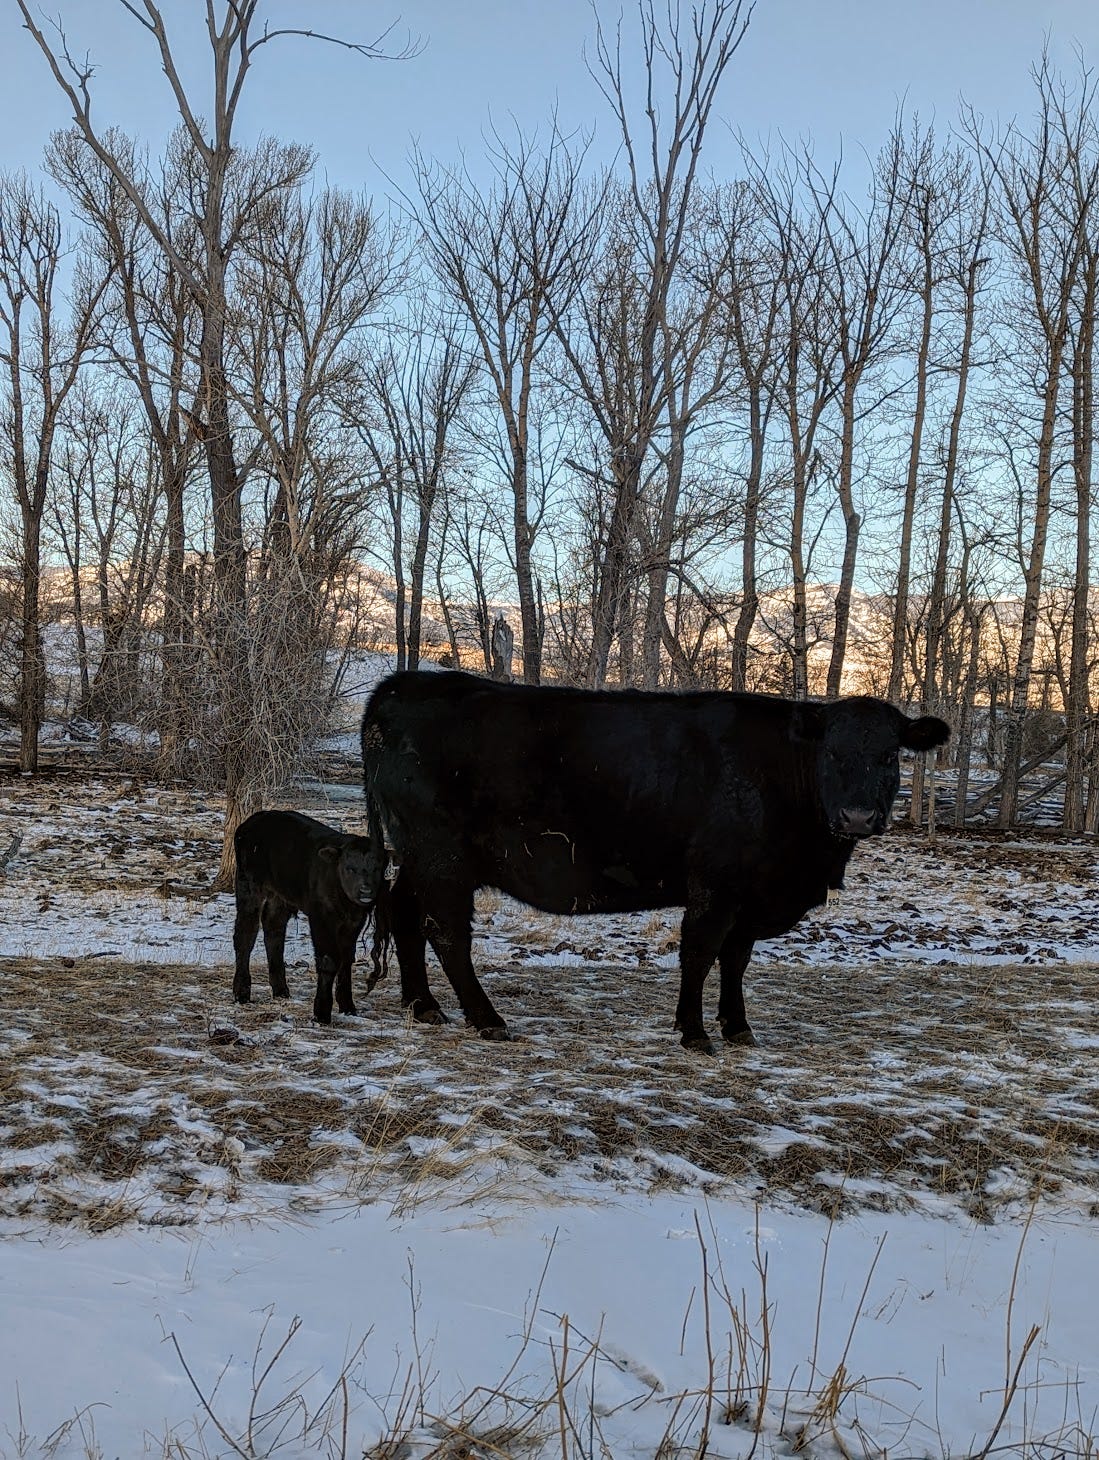 Cow with brand new calf in field, trees in background.